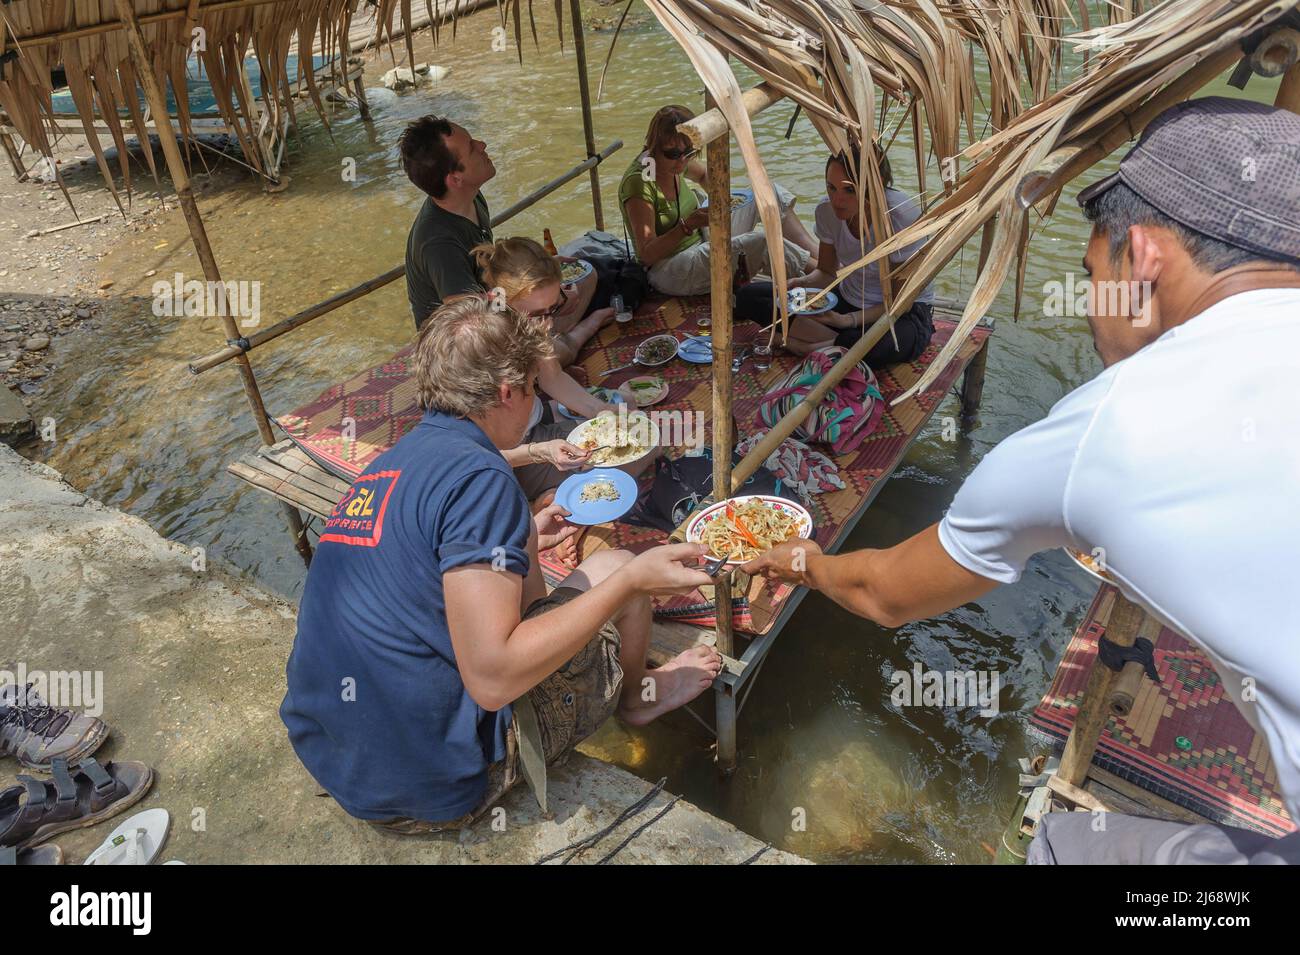 Tourists enjoying a traditional lunch at a riverside restaurant hut, Nong Lu, sangkhla buri district, Thailand Stock Photo